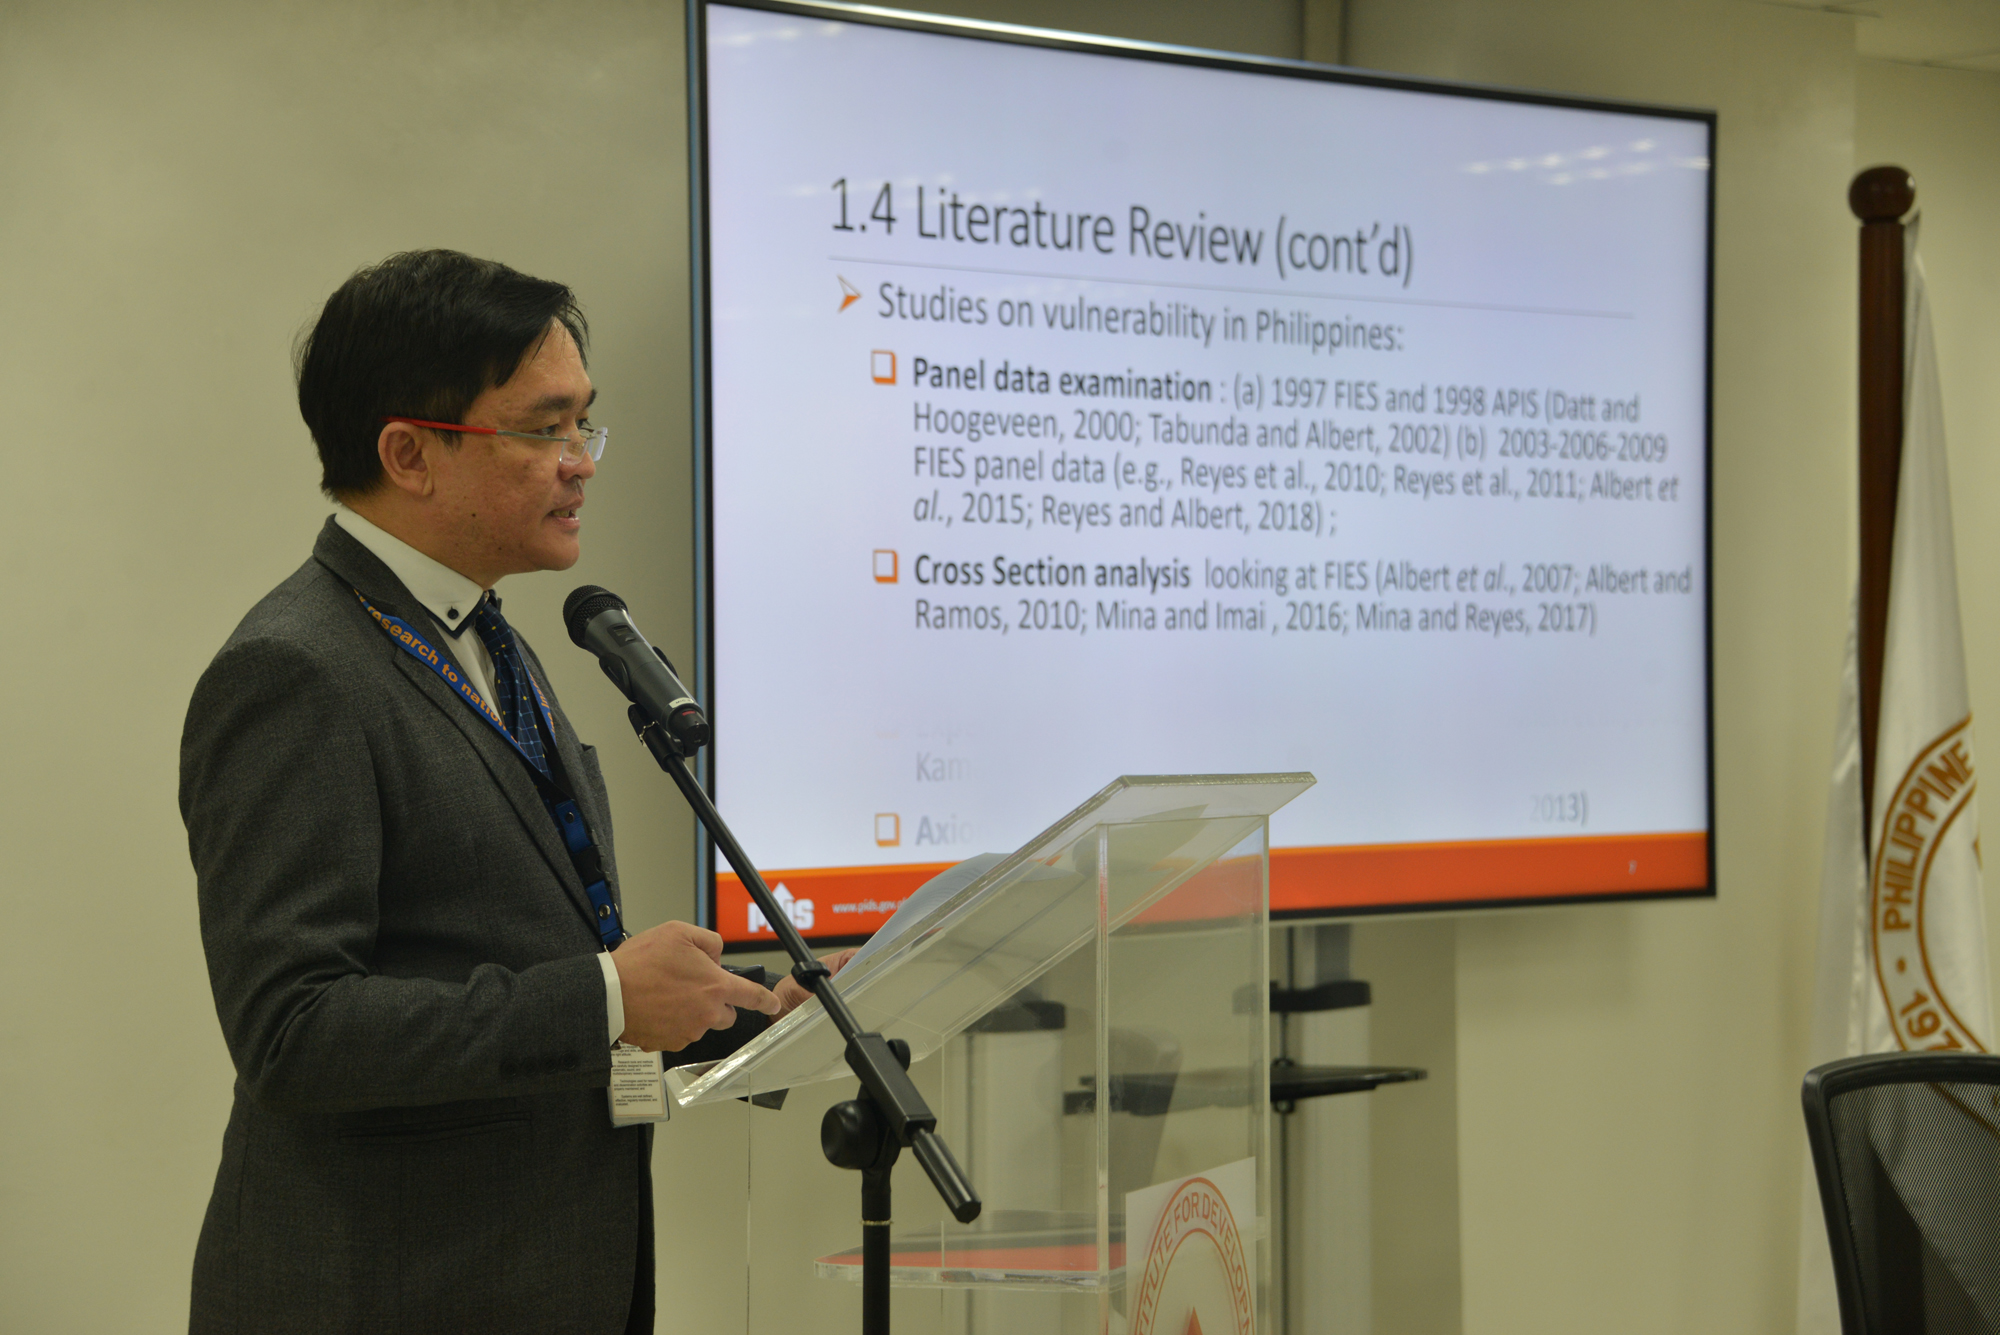 Public Seminar on Poverty and Child Stunting-pids-poverty-7-20190725.jpg